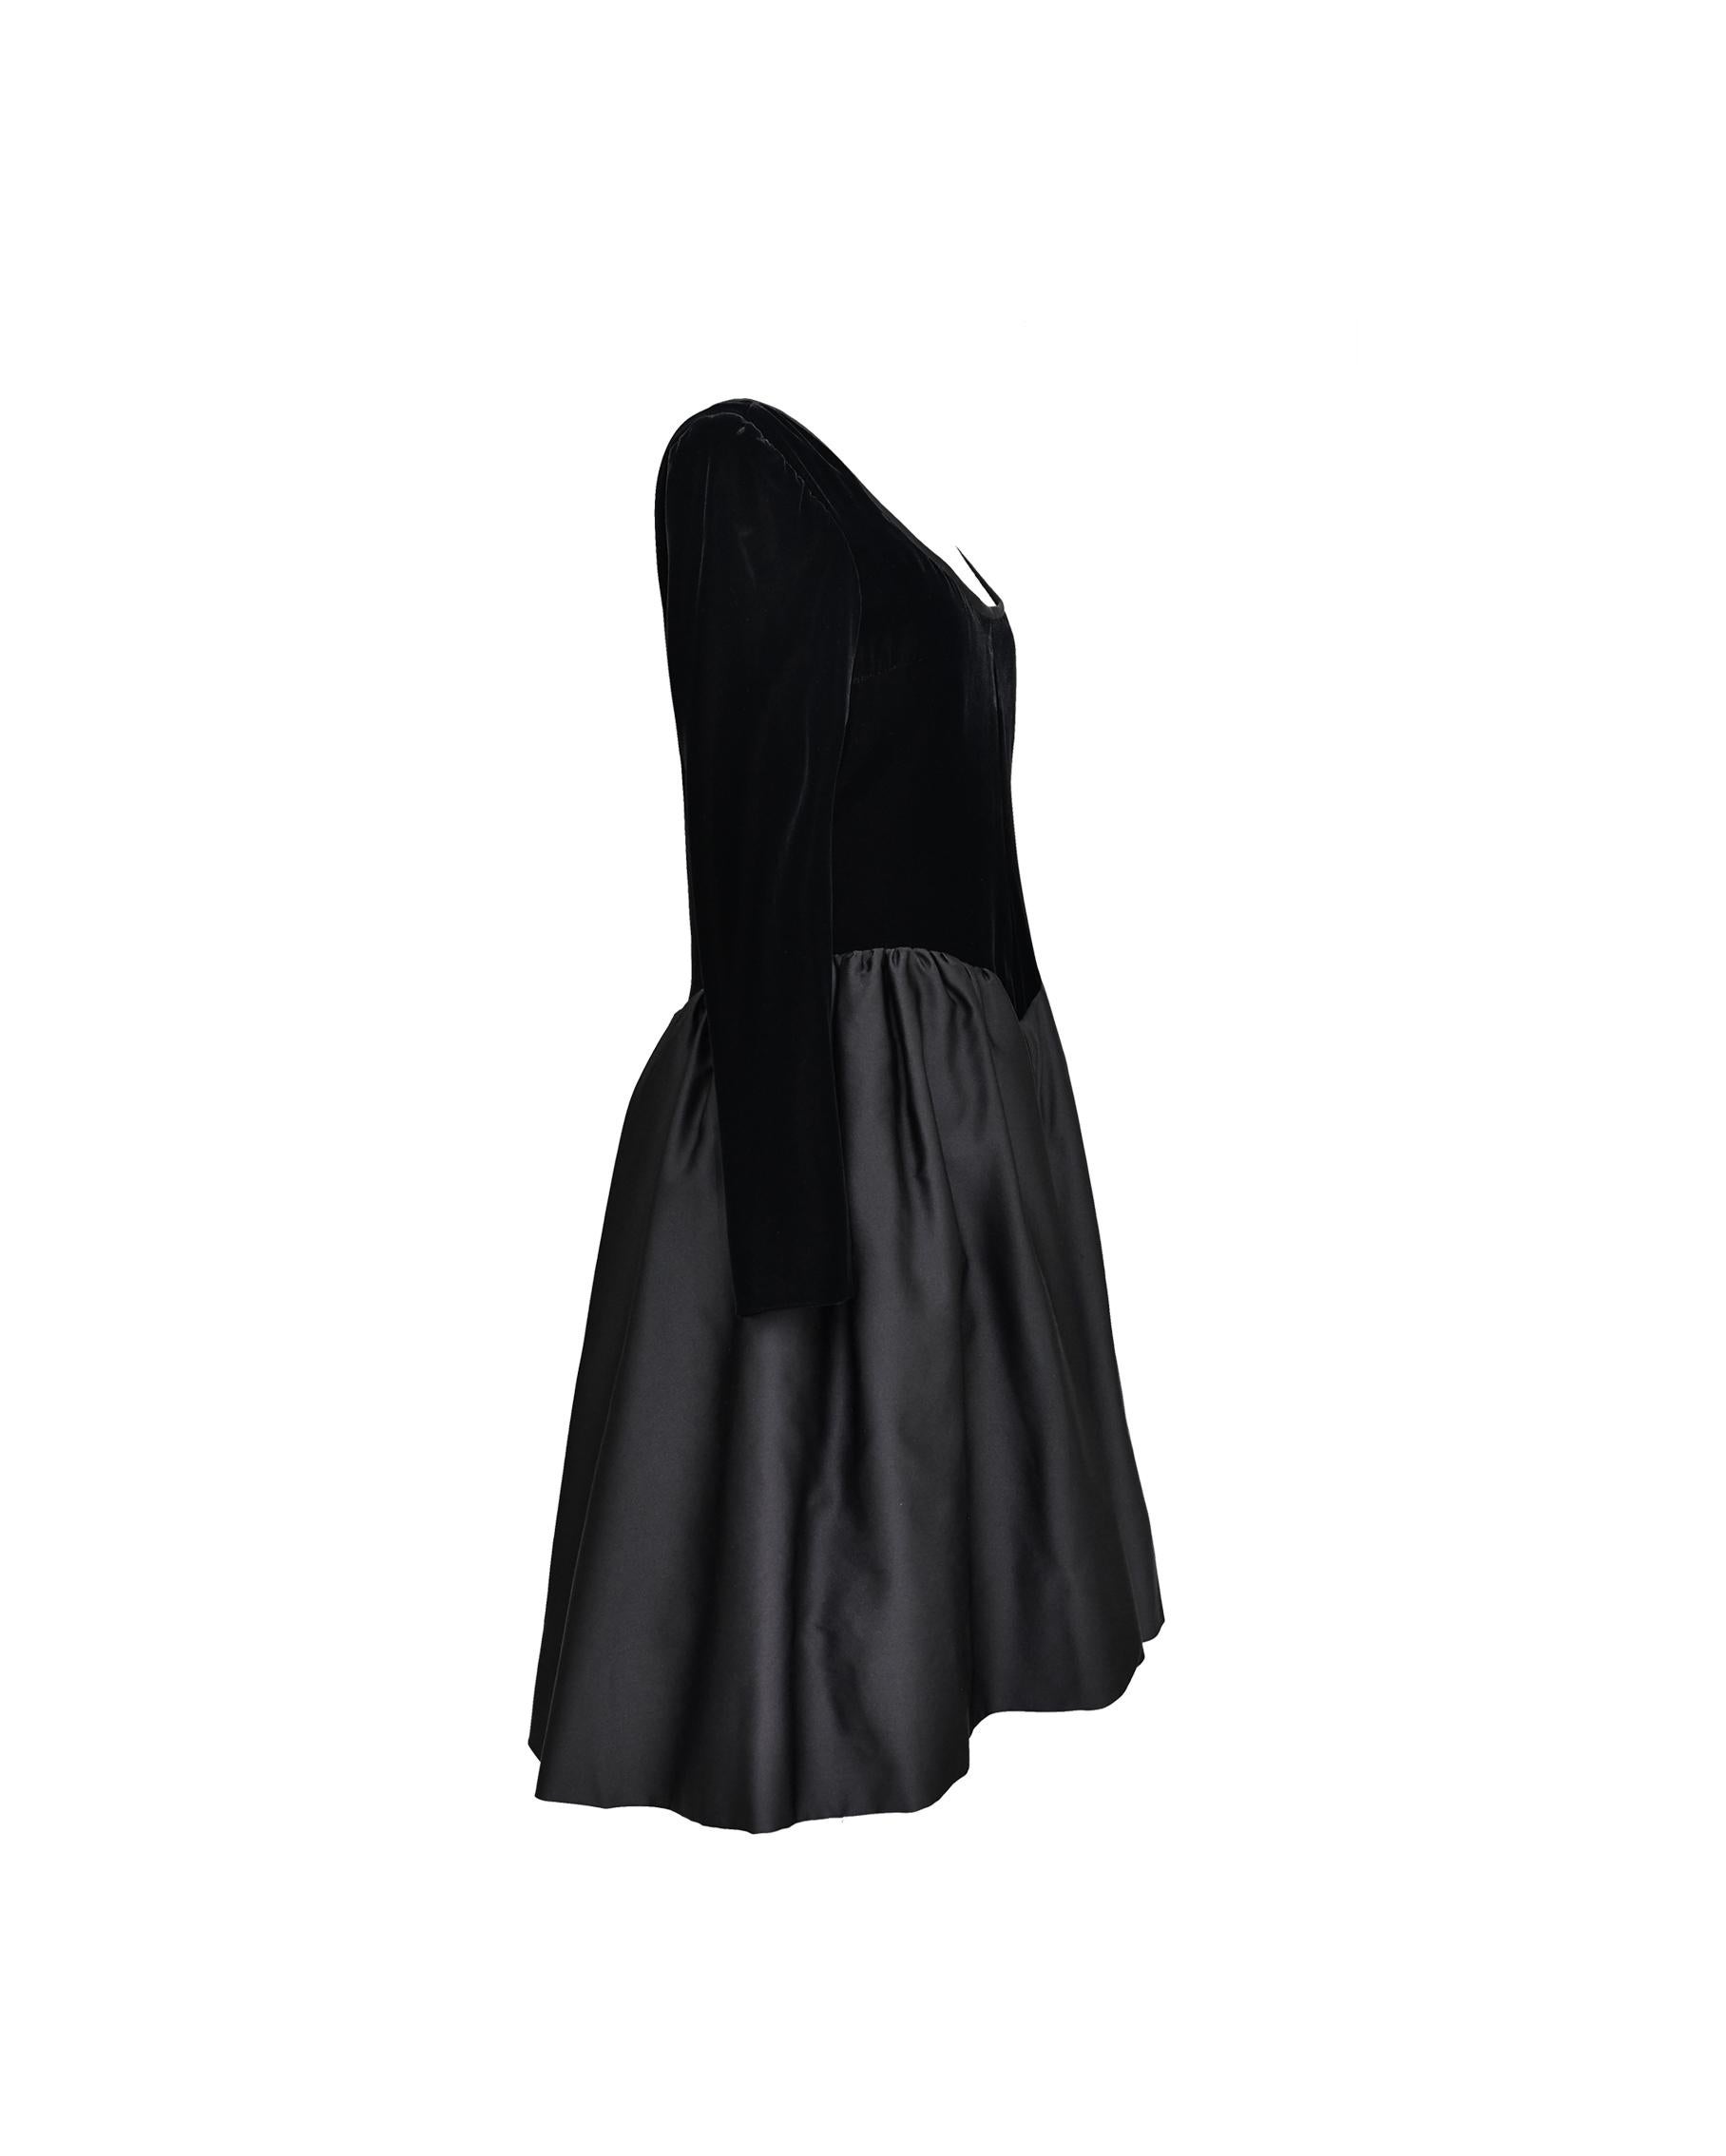 1980’s Yves Saint Laurent Couture black cocktail dress with scoop neck velvet upper and lined, voluminous silk taffeta flare skirt. Zips up back and sides of wrists. 